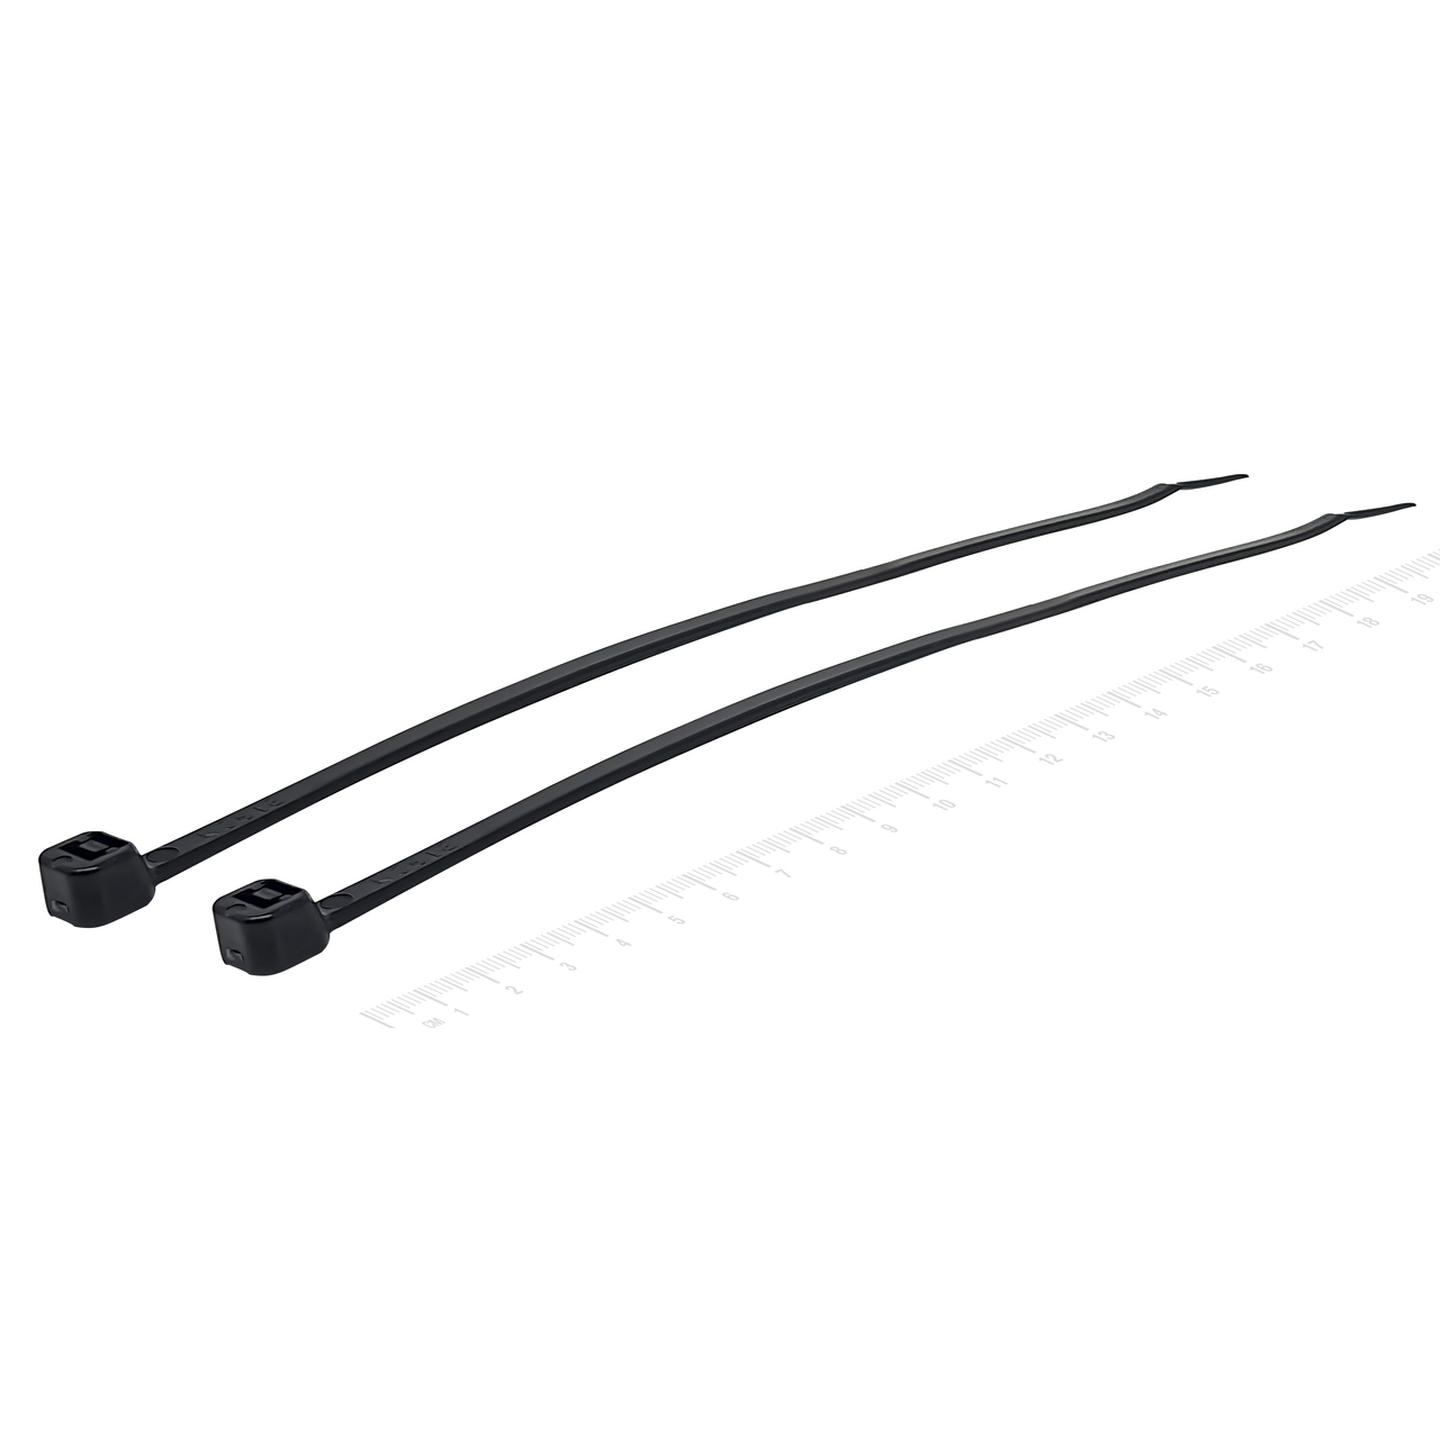 200mm Black Cable Ties - Pack of 500